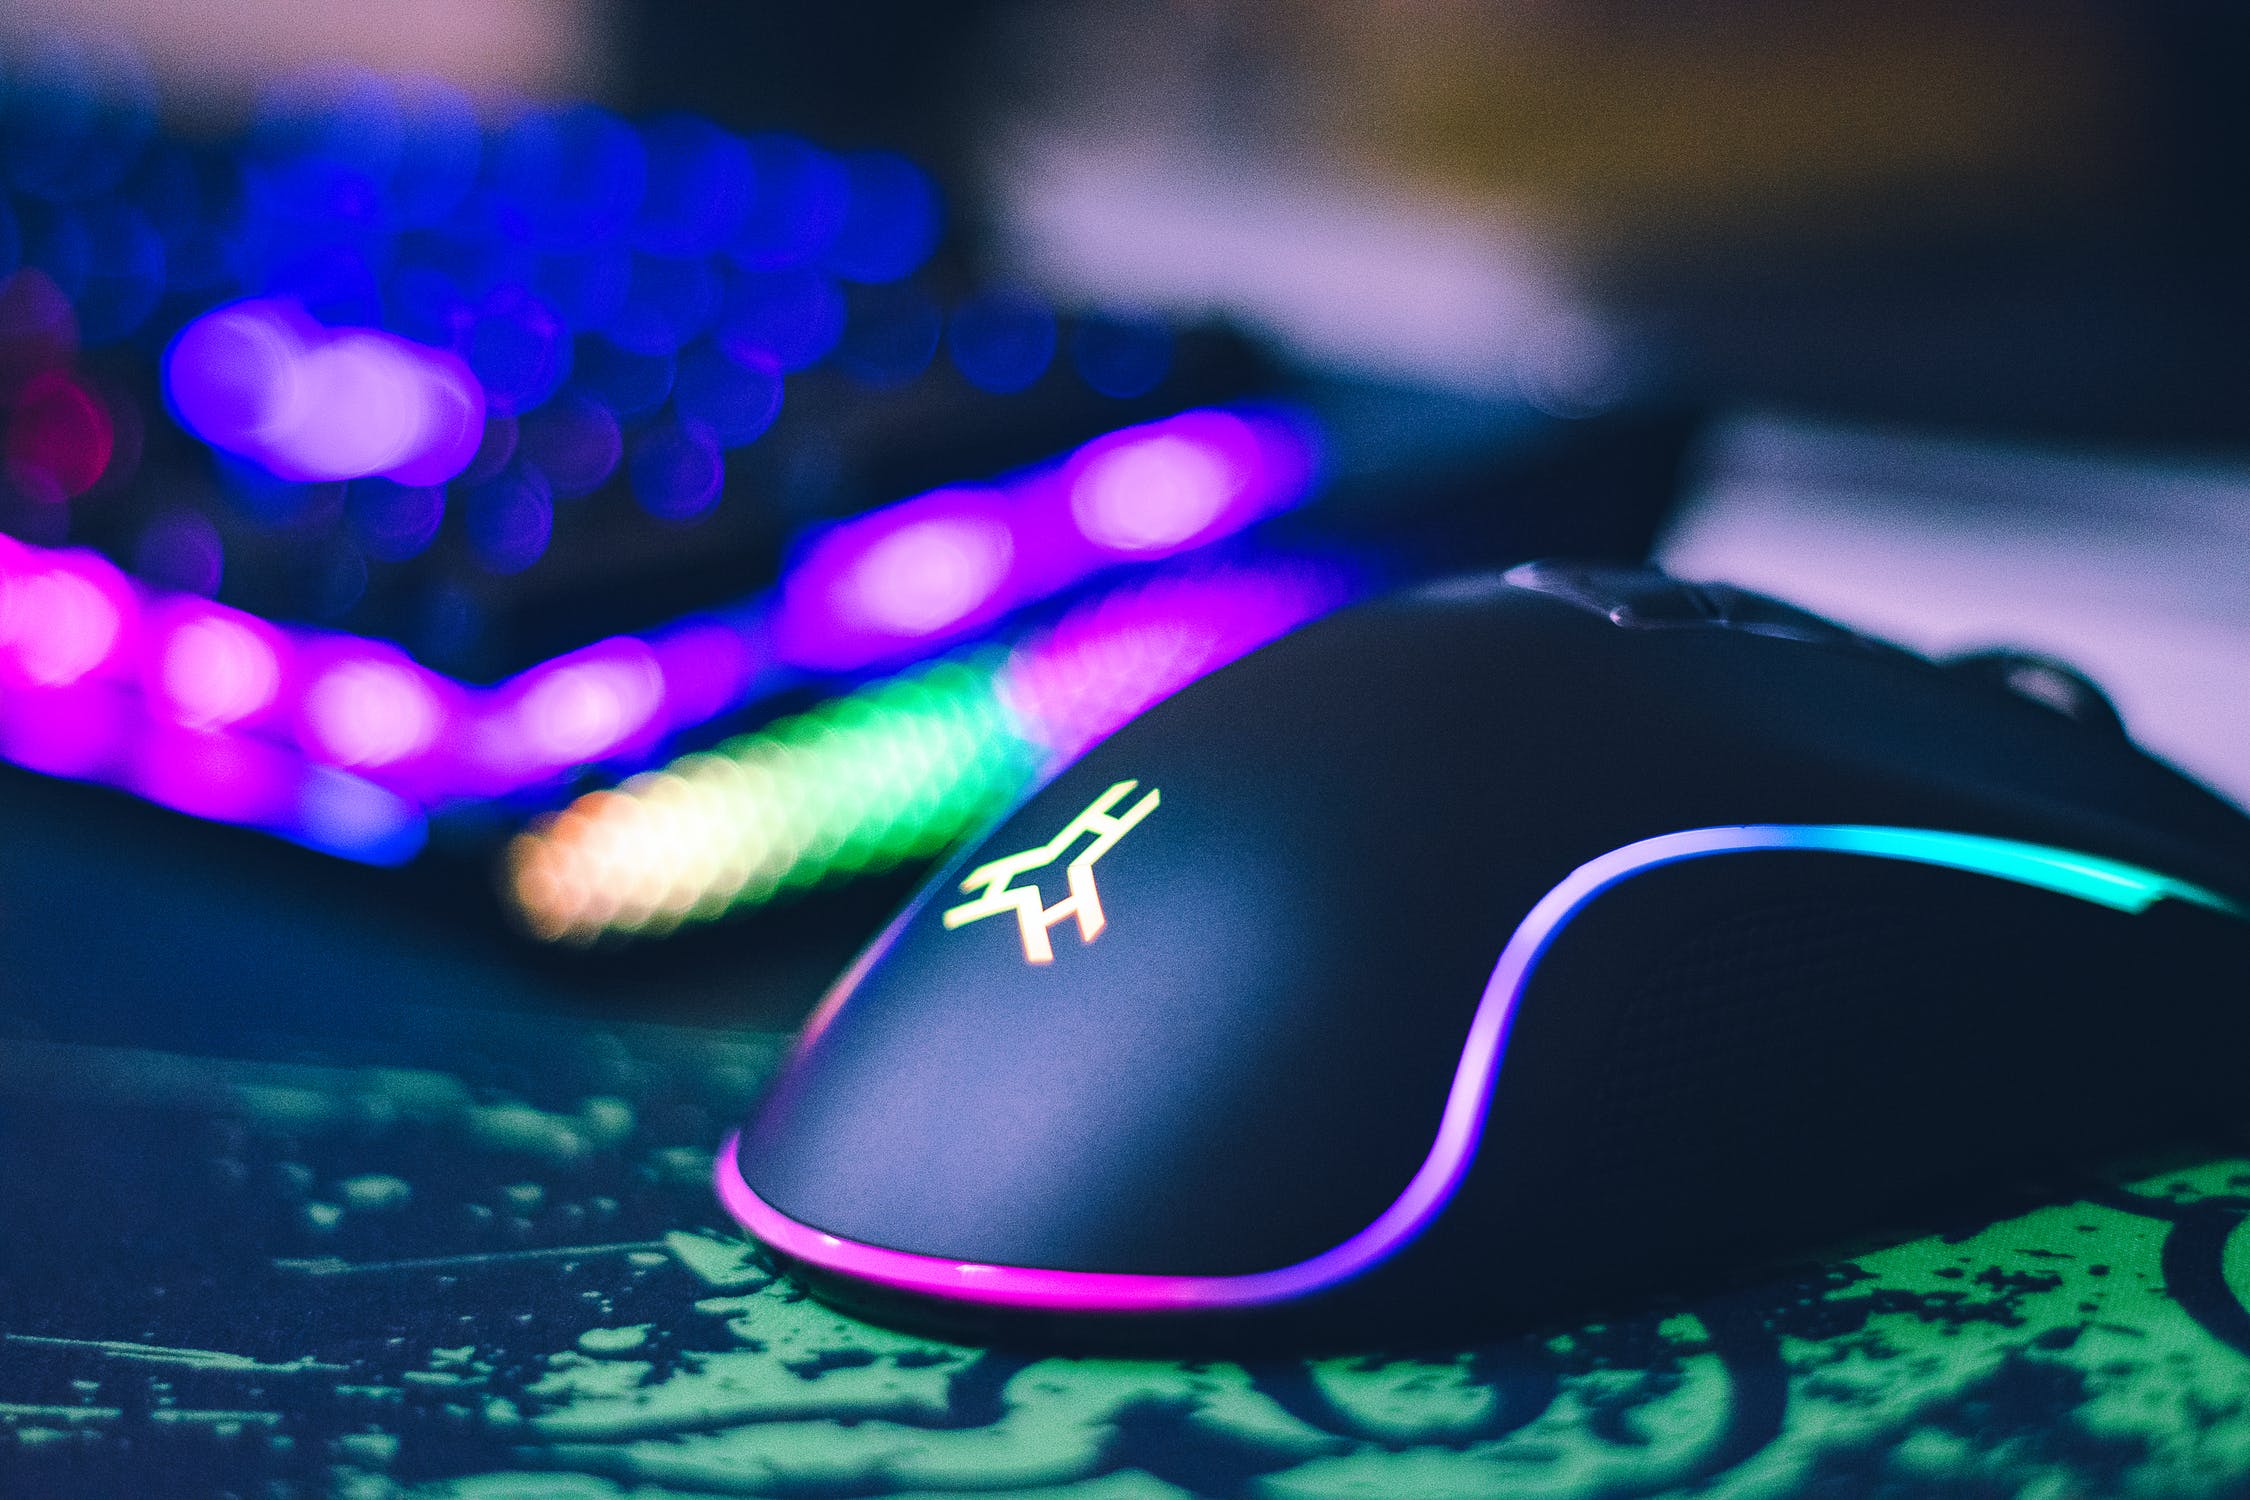 a gaming mouse with RGB light